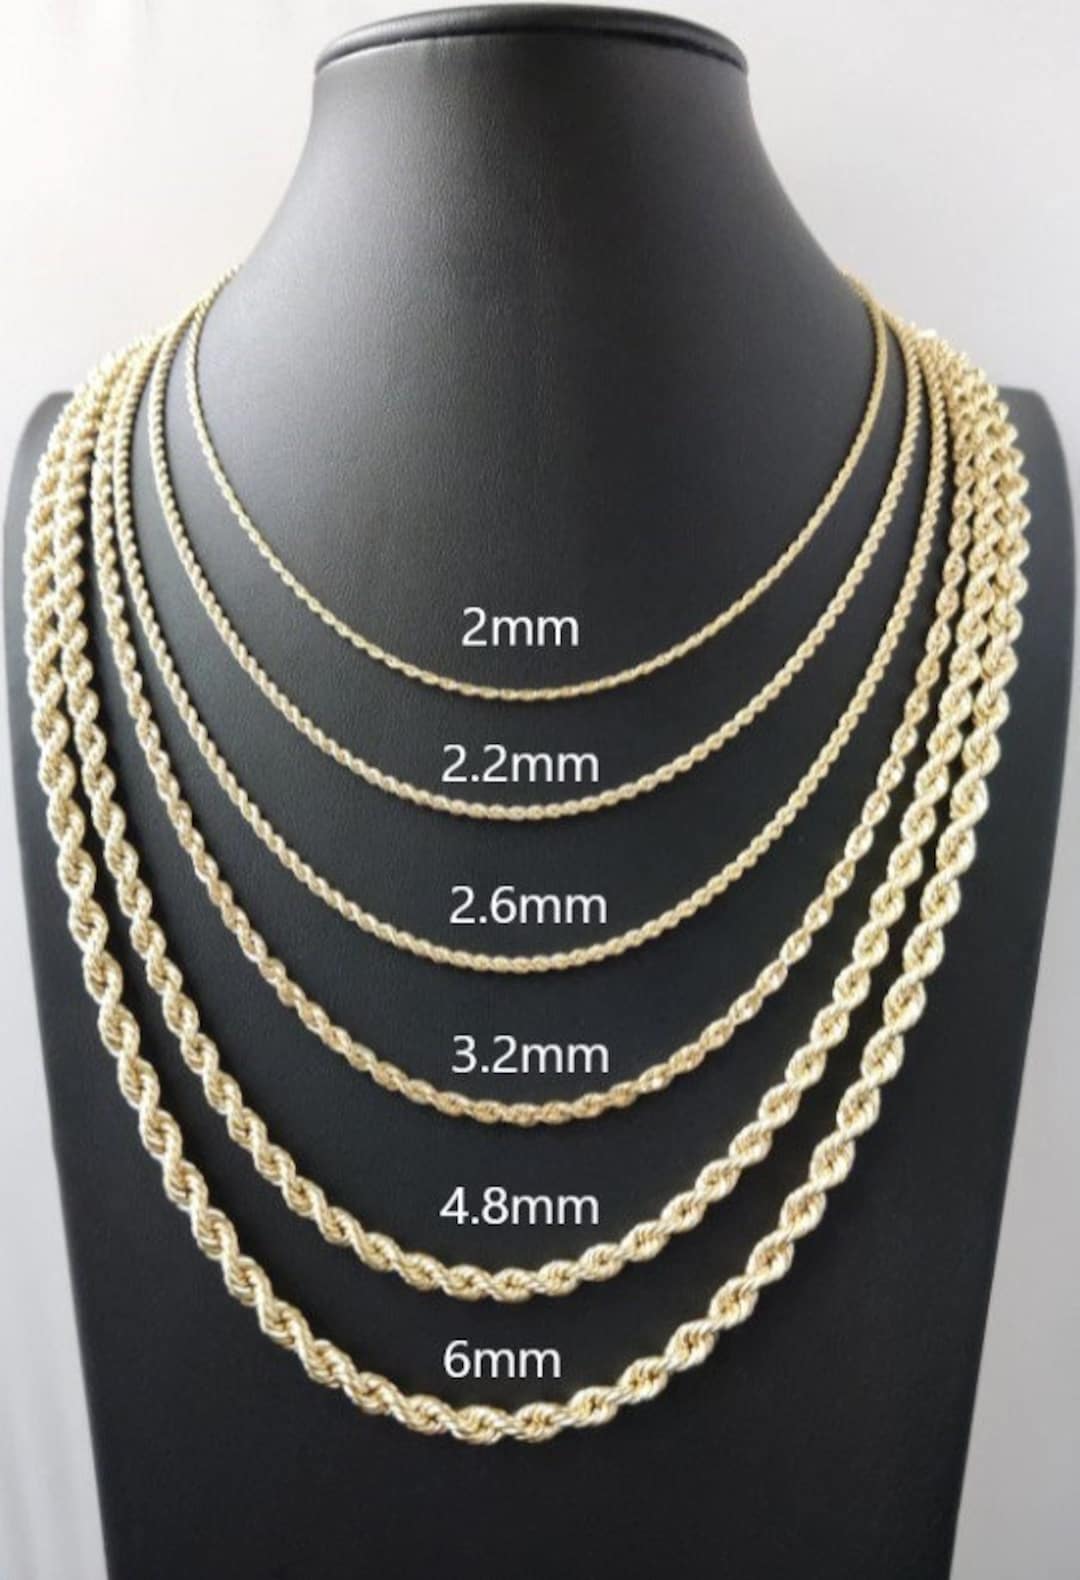 Gold Rope Chain 14k Real Gold Rope Chain Necklace 2.2mm 2.8mm 3.3